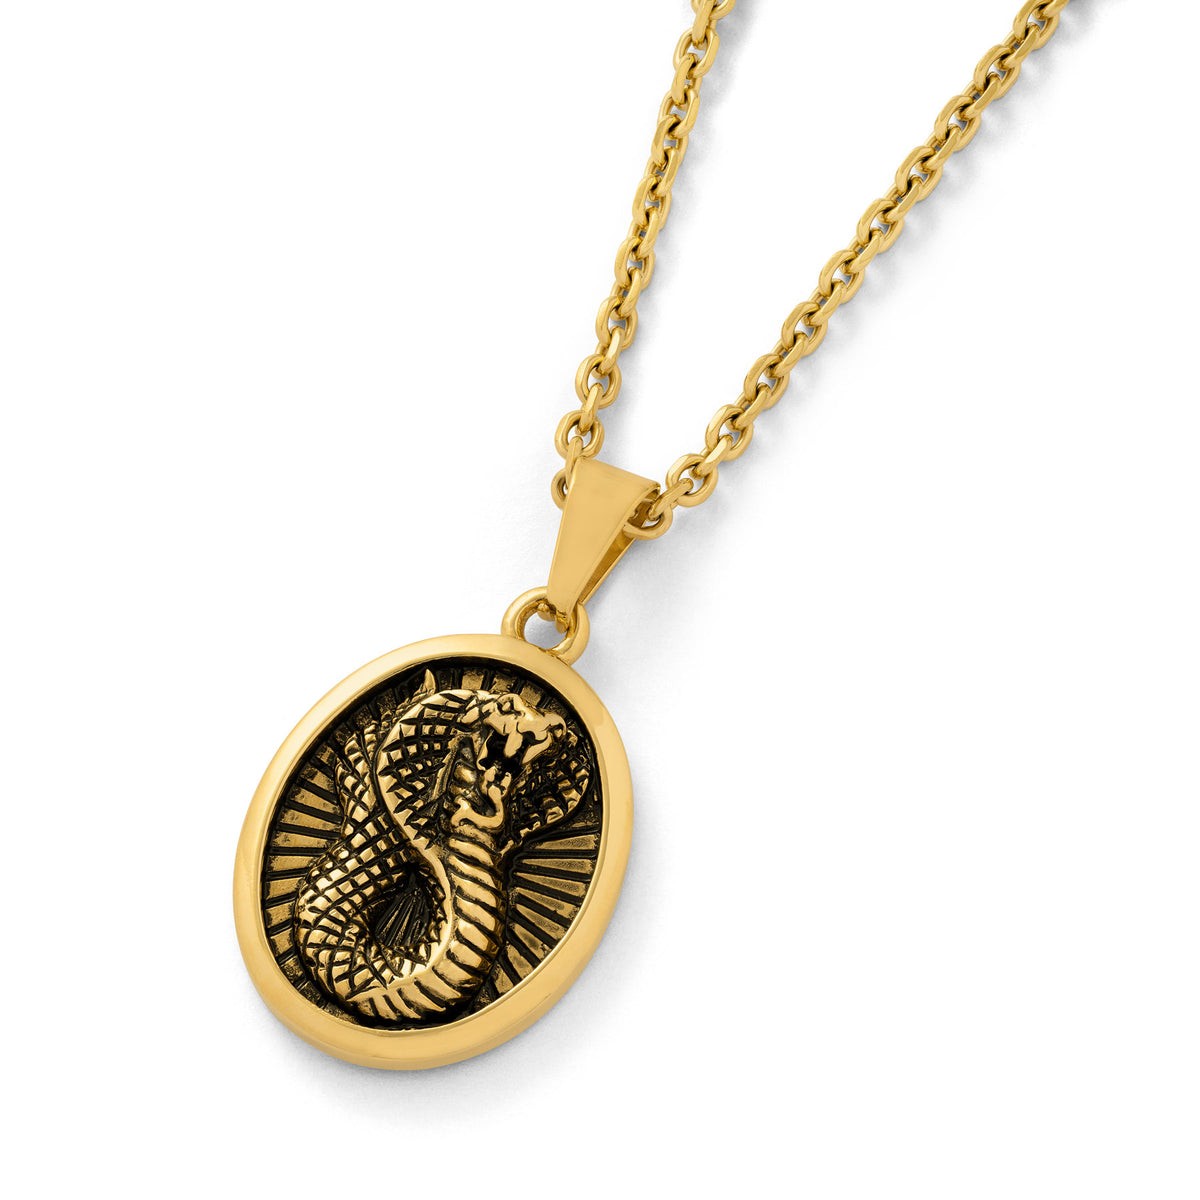 Gold snake charm pendant chain necklace